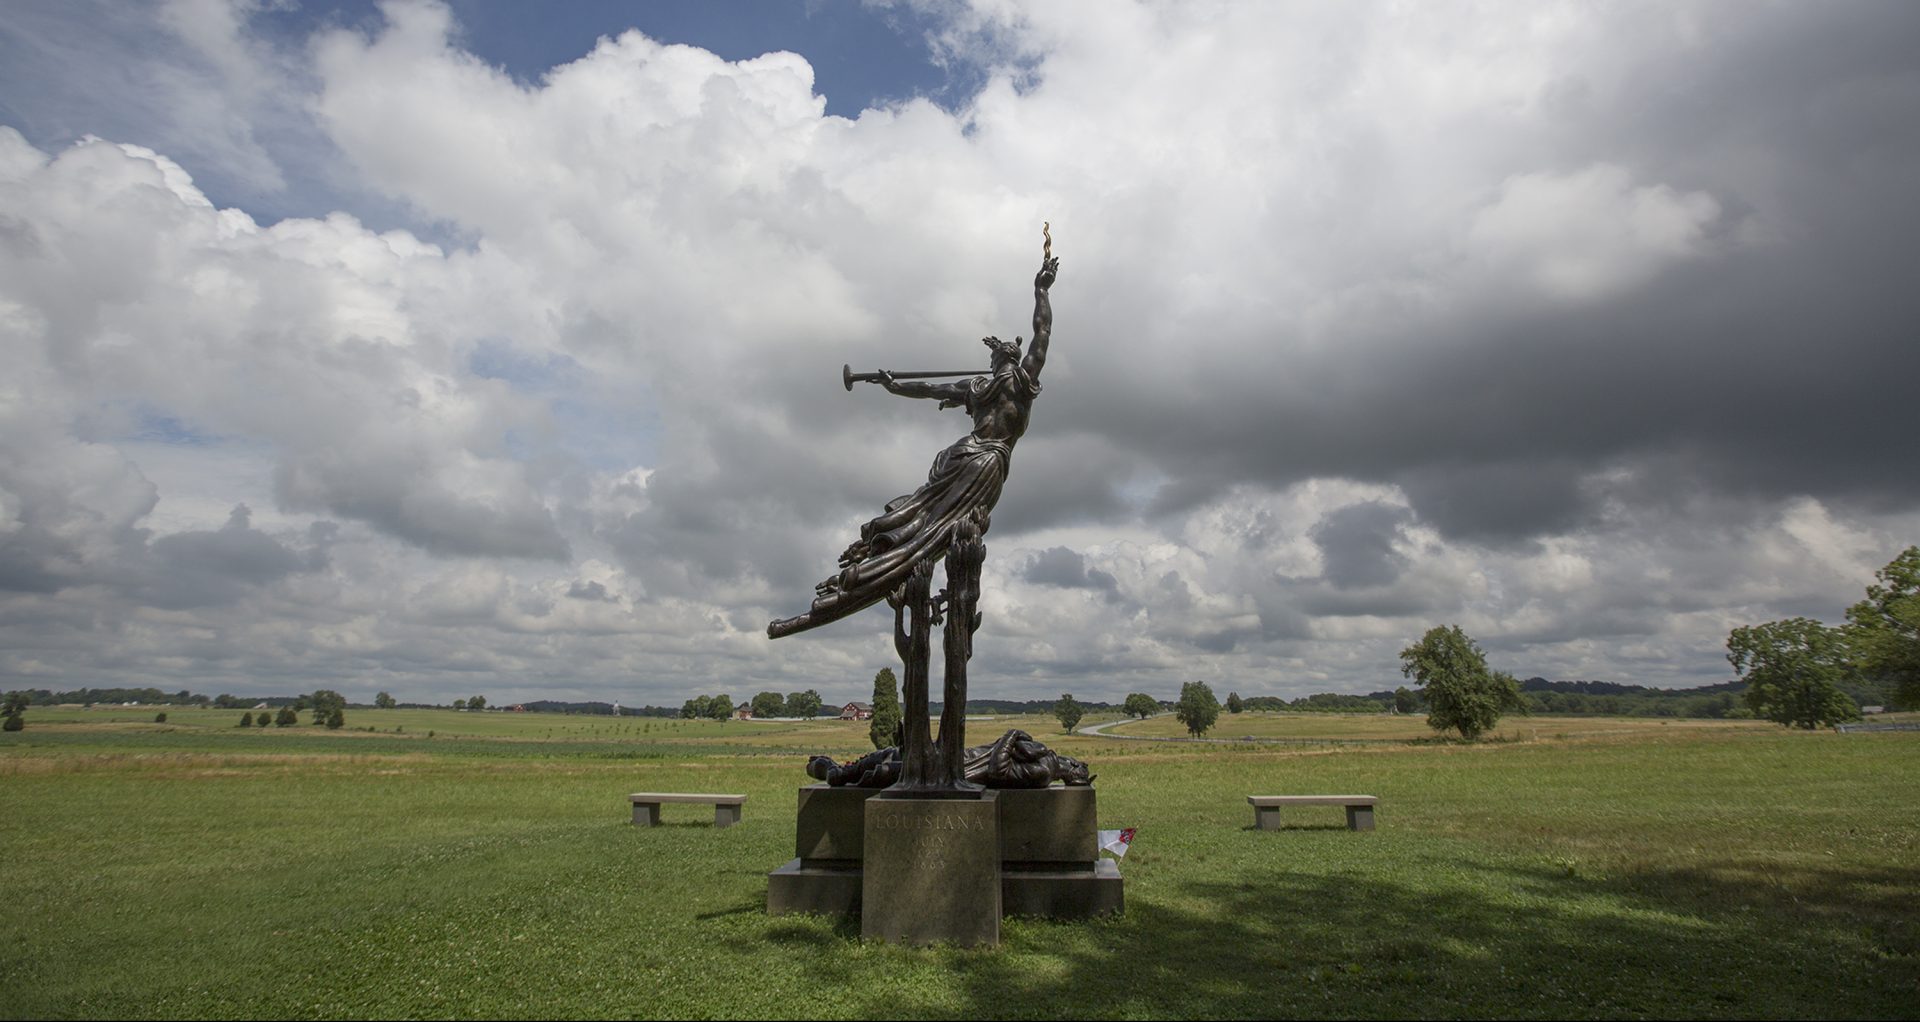 The Louisiana Monument raises up near the rebel encampment on Seminary Ridge on the Gettysburg battlefield, July 1, 2013, the 150th anniversary of the first day of the historic 1863 battle.
Mark Pynes | mpynes@pennlive.com